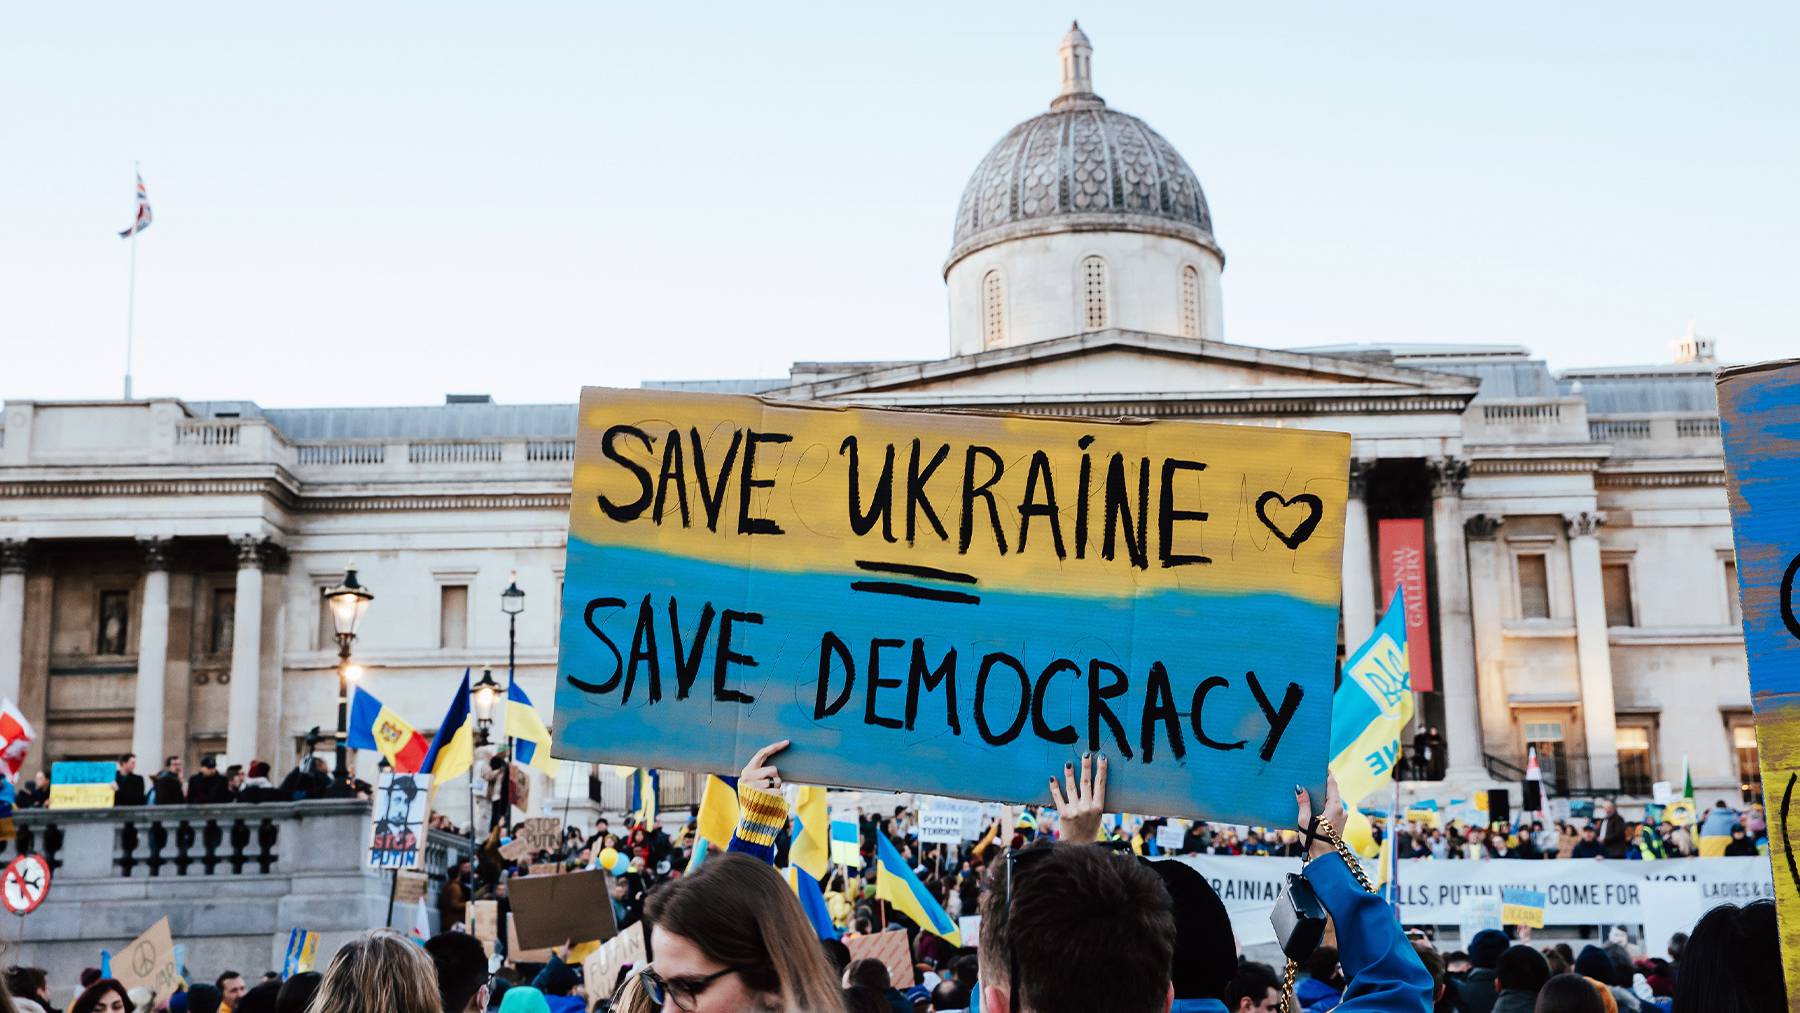 Protesters demonstrate against Russia's invasion of Ukraine in London in February.